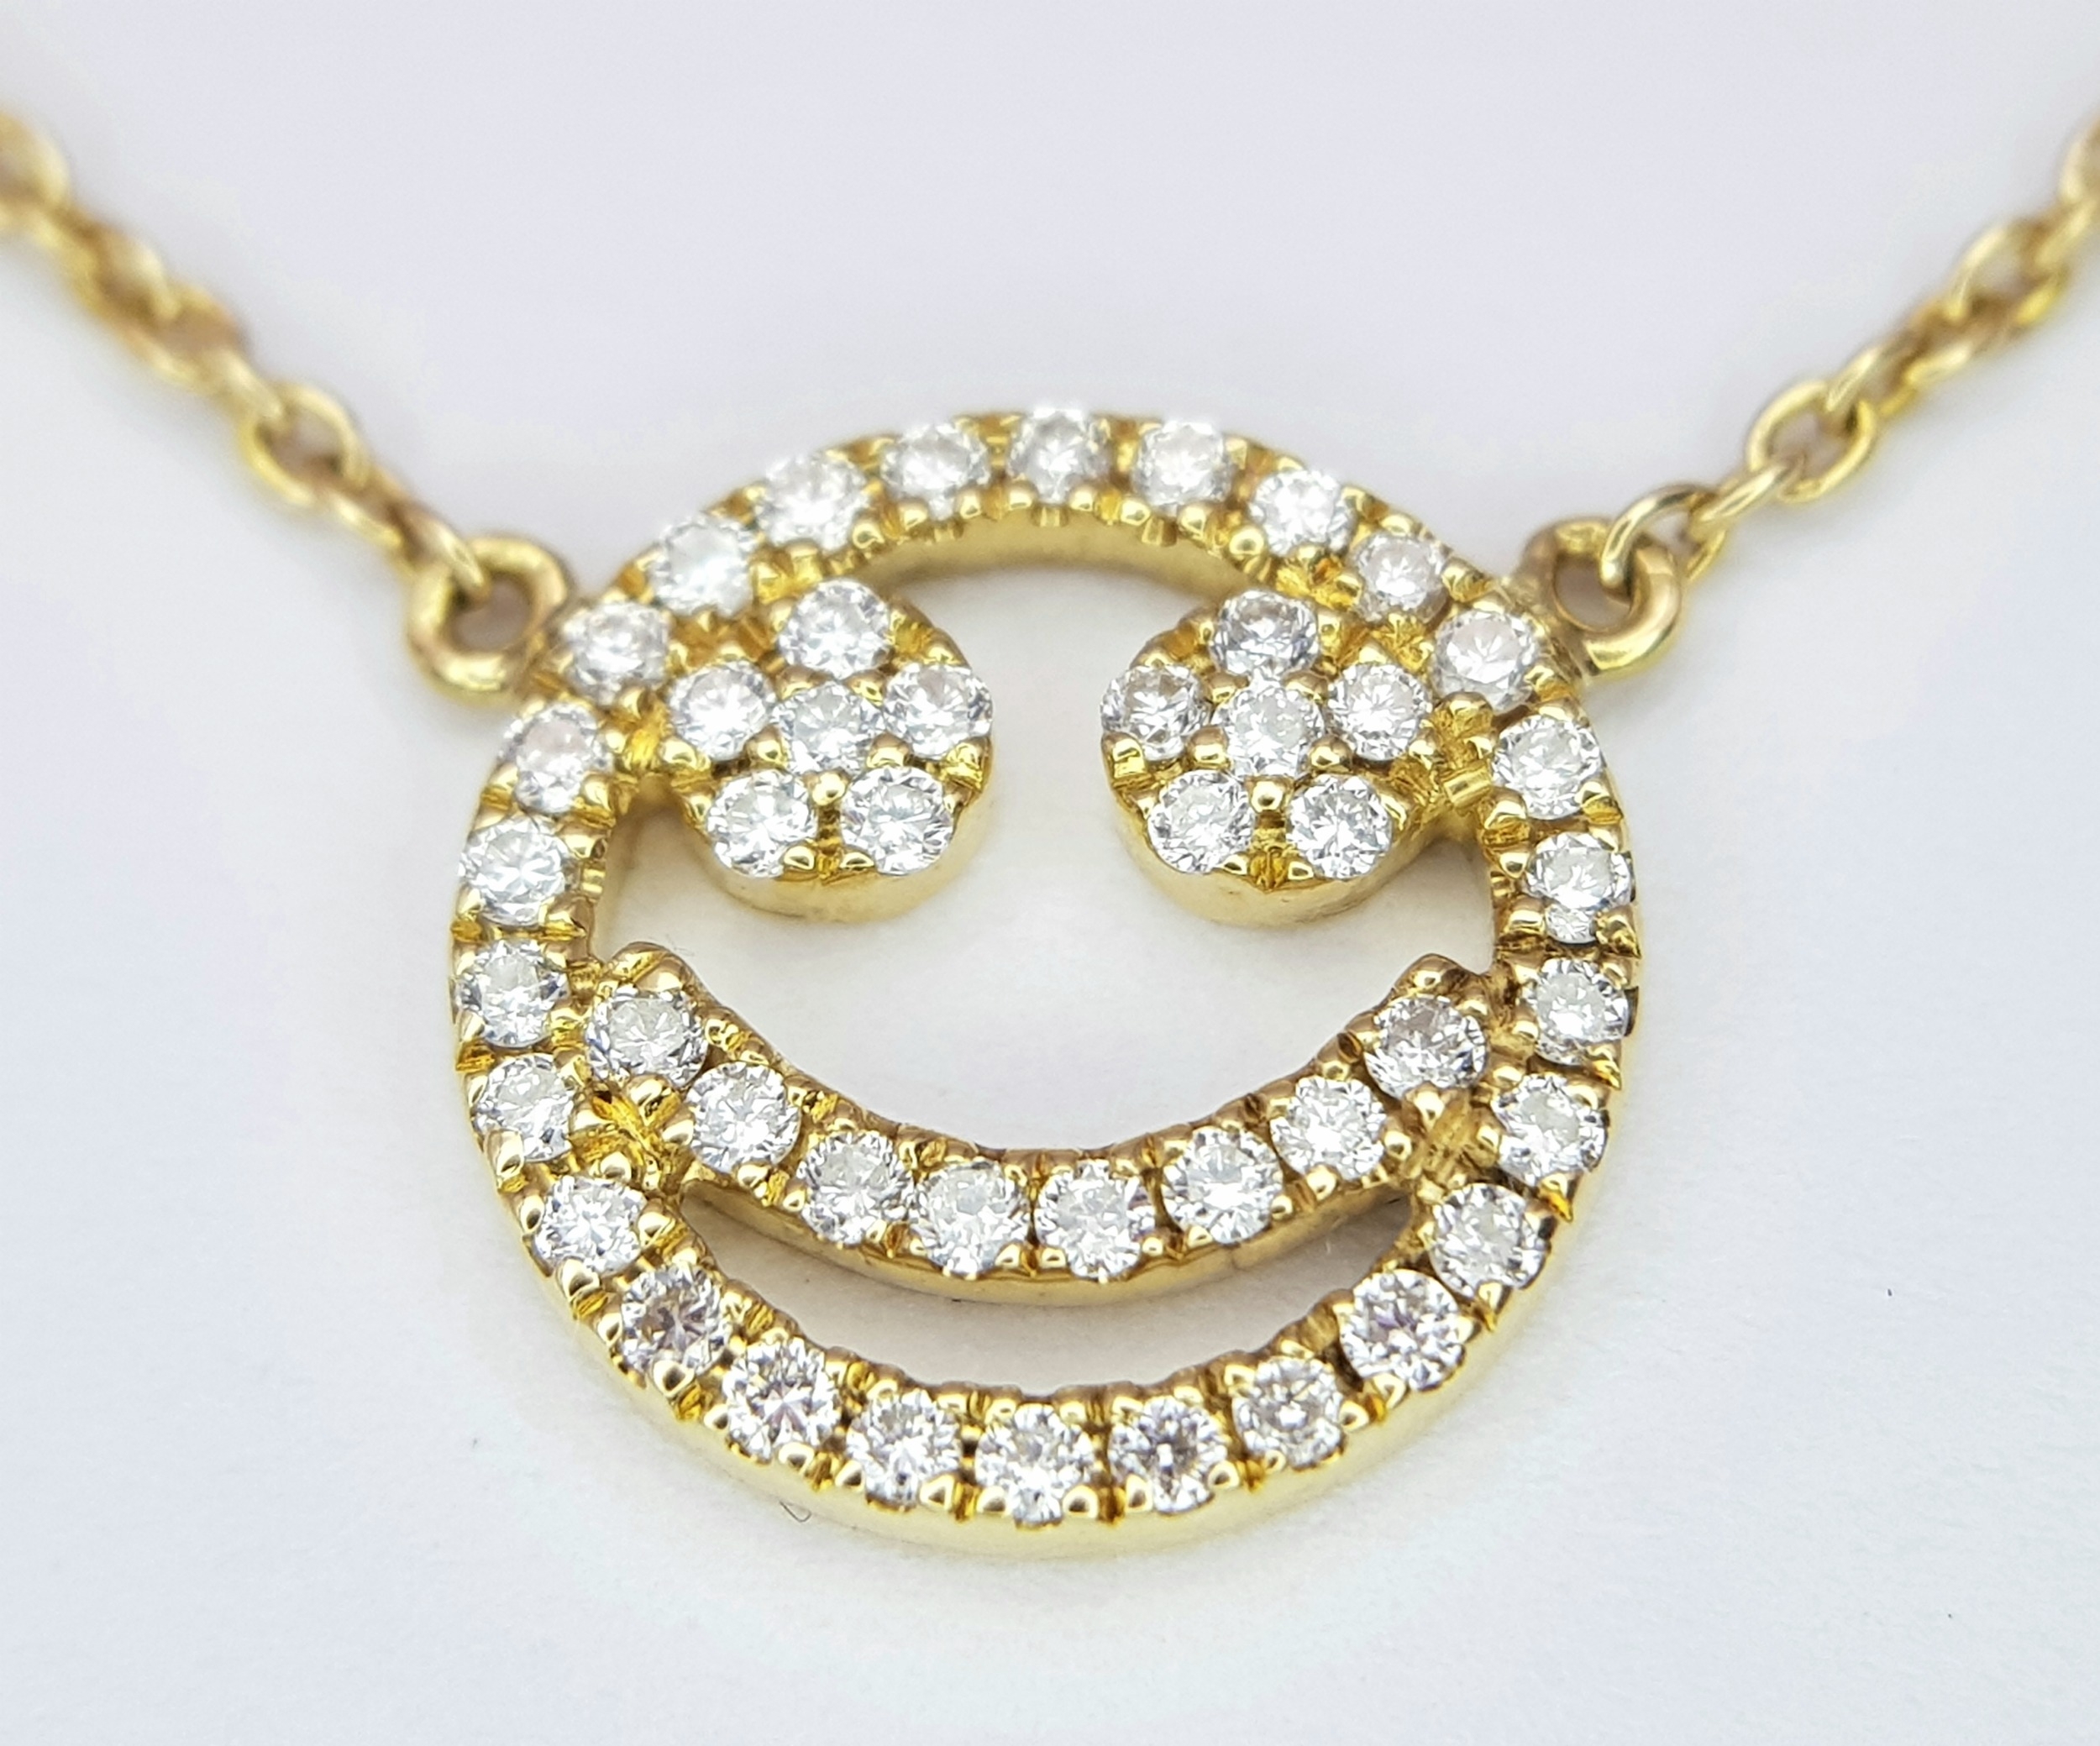 An 18K Gold Diamond Smiley Face Pendant on an 18K Yellow Gold Disappearing Necklace. 1cm diameter - Image 6 of 7